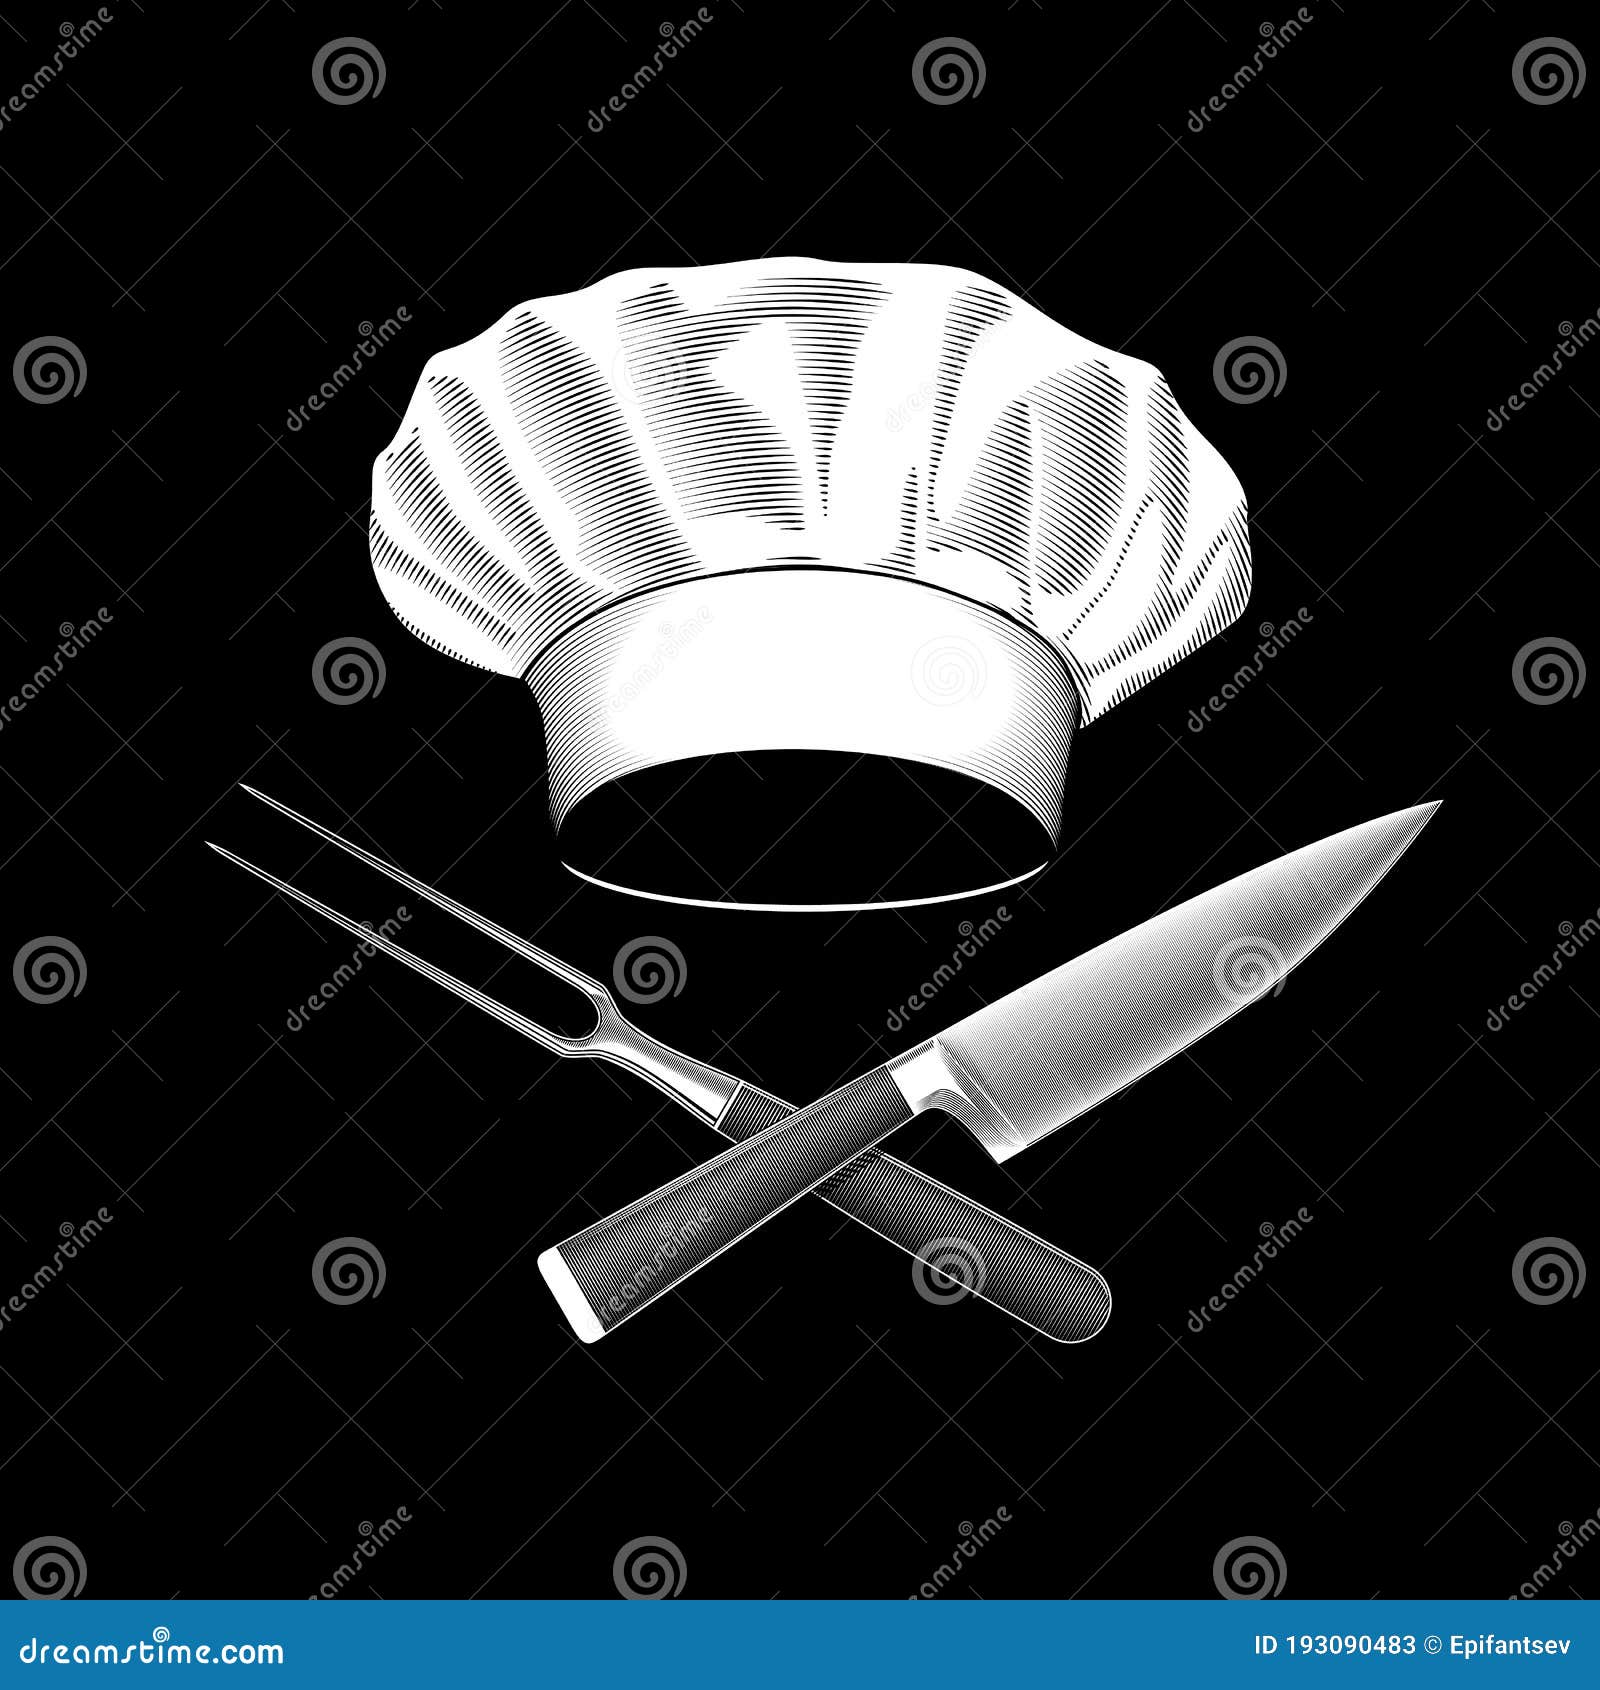 French knife - Free food and restaurant icons